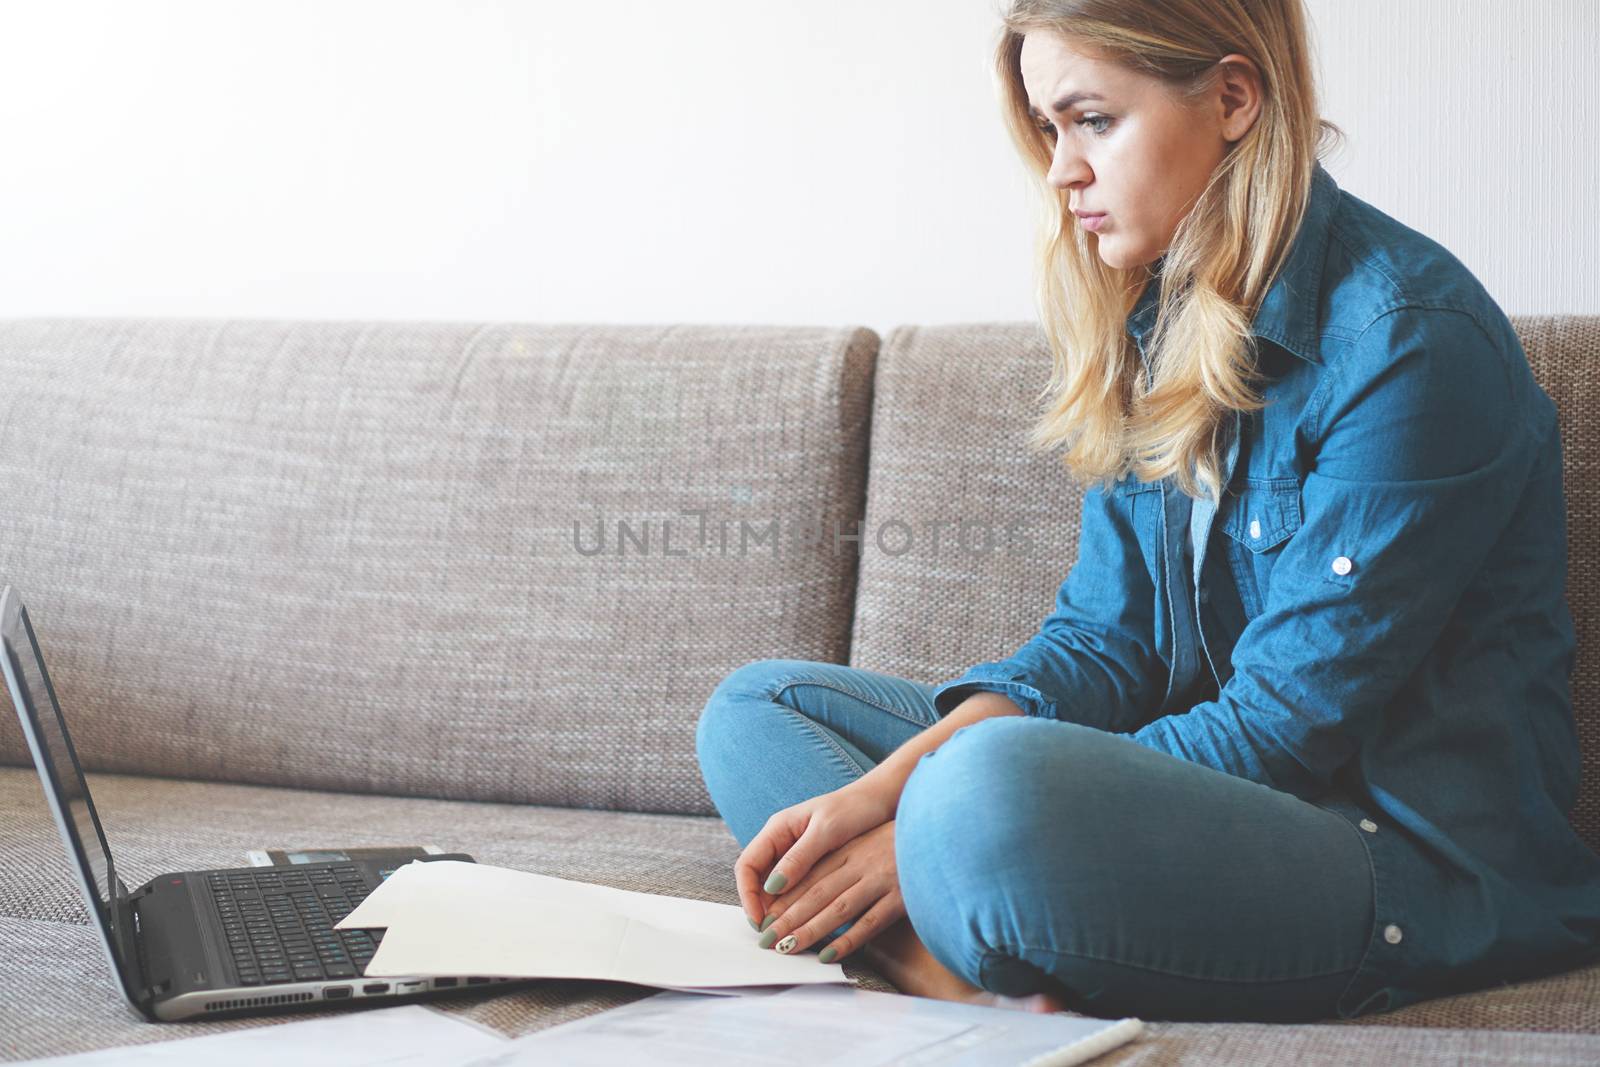 Serious woman focused on finding information. Sitting at home in front of a laptop. The concept of business and online student learning